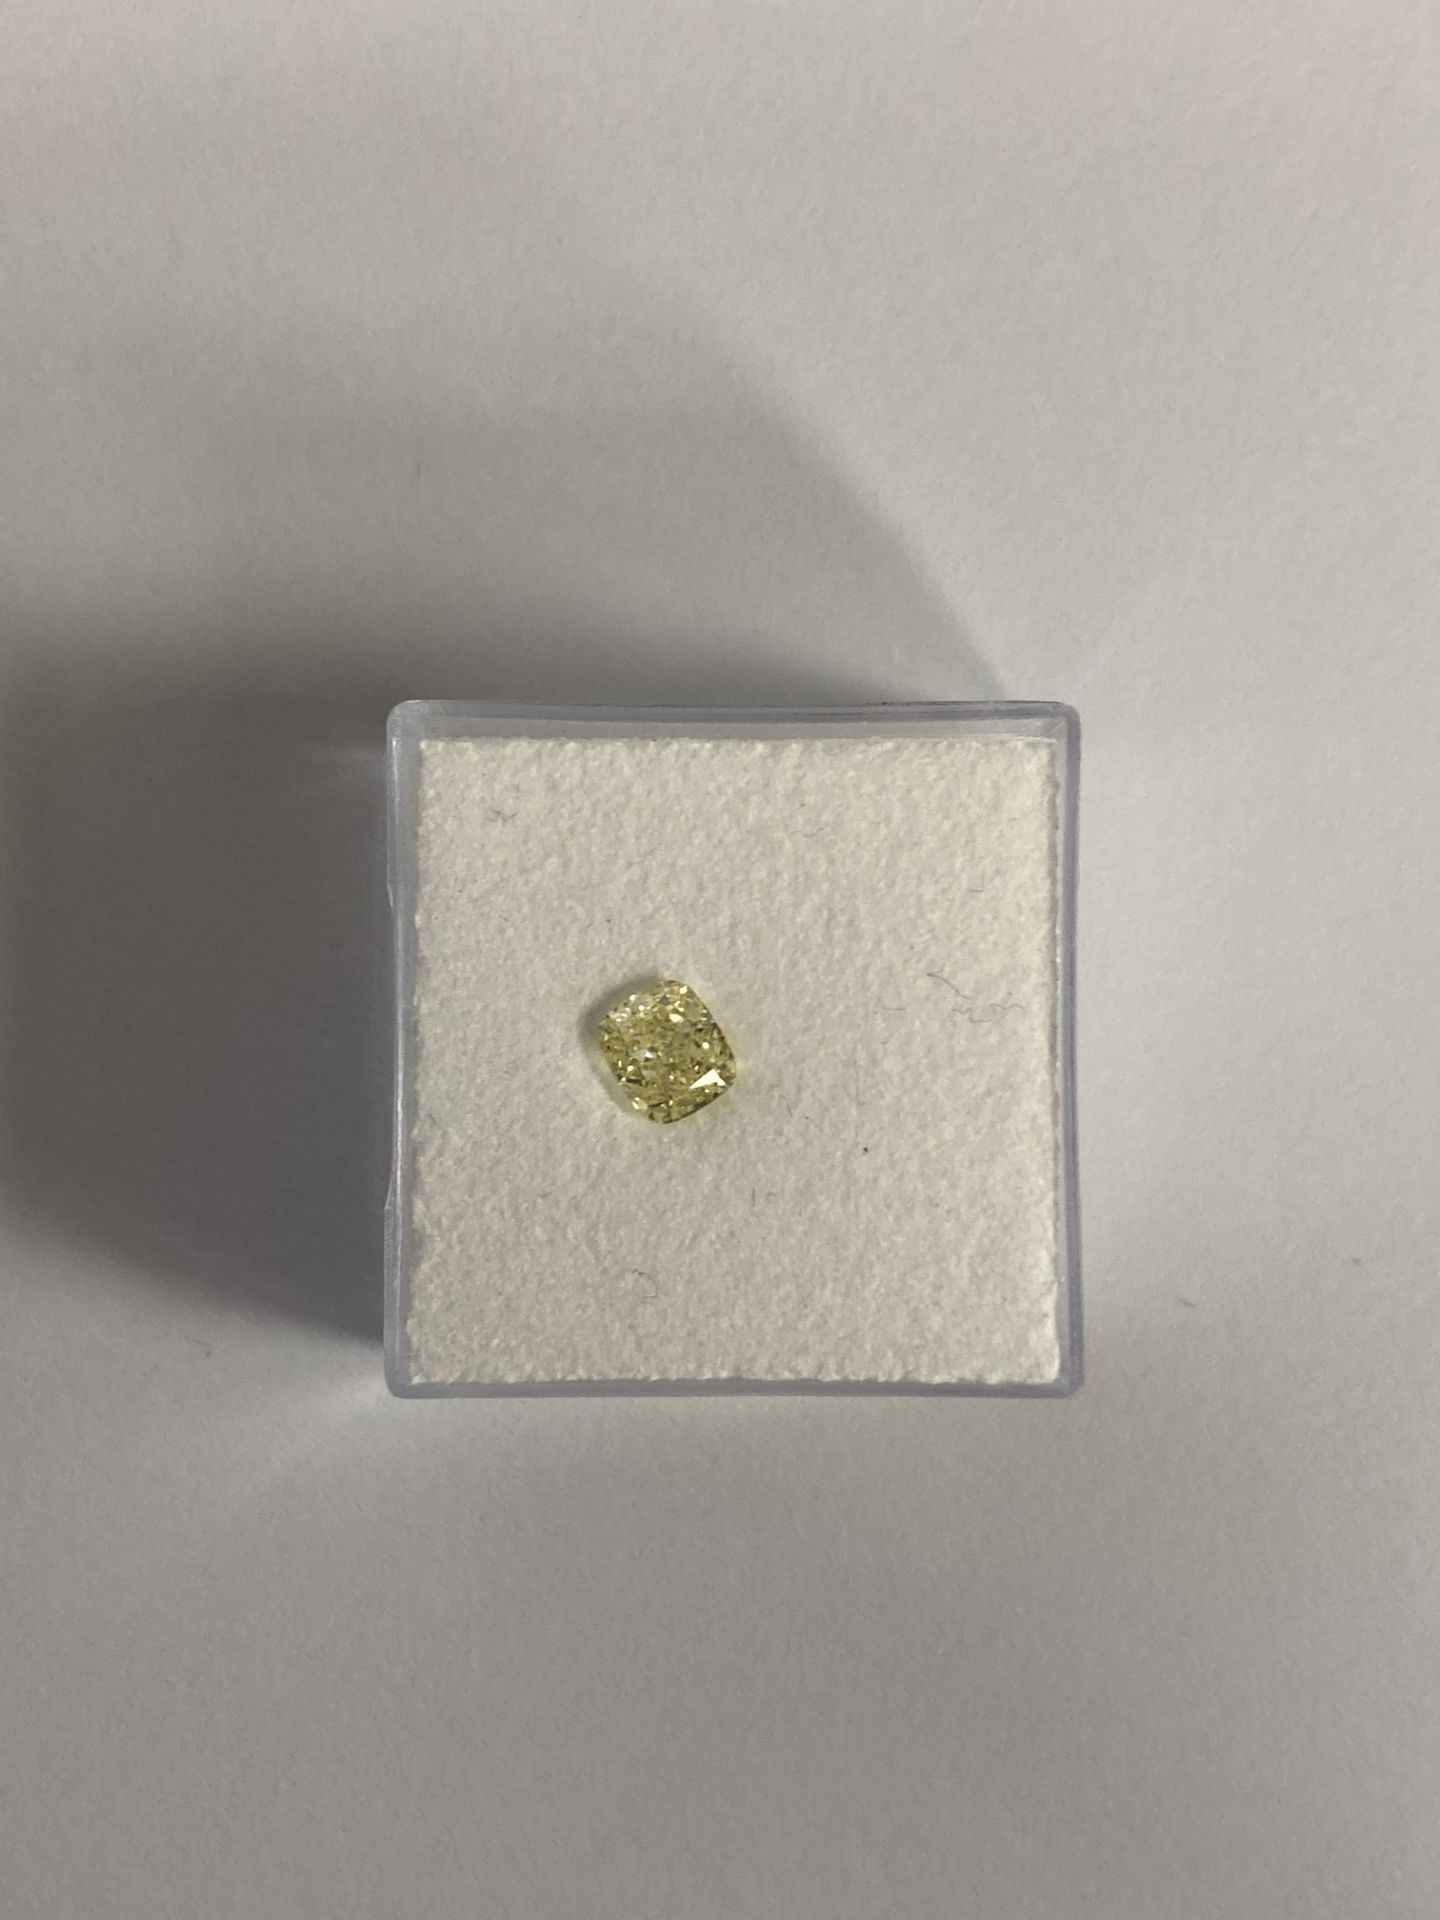 RRP £4,900 Cushion Modified Brilliant Cut 5.00X4.37X3.05Mm, 0.62 Carat Fancy Light Yellow Natural - Image 5 of 6